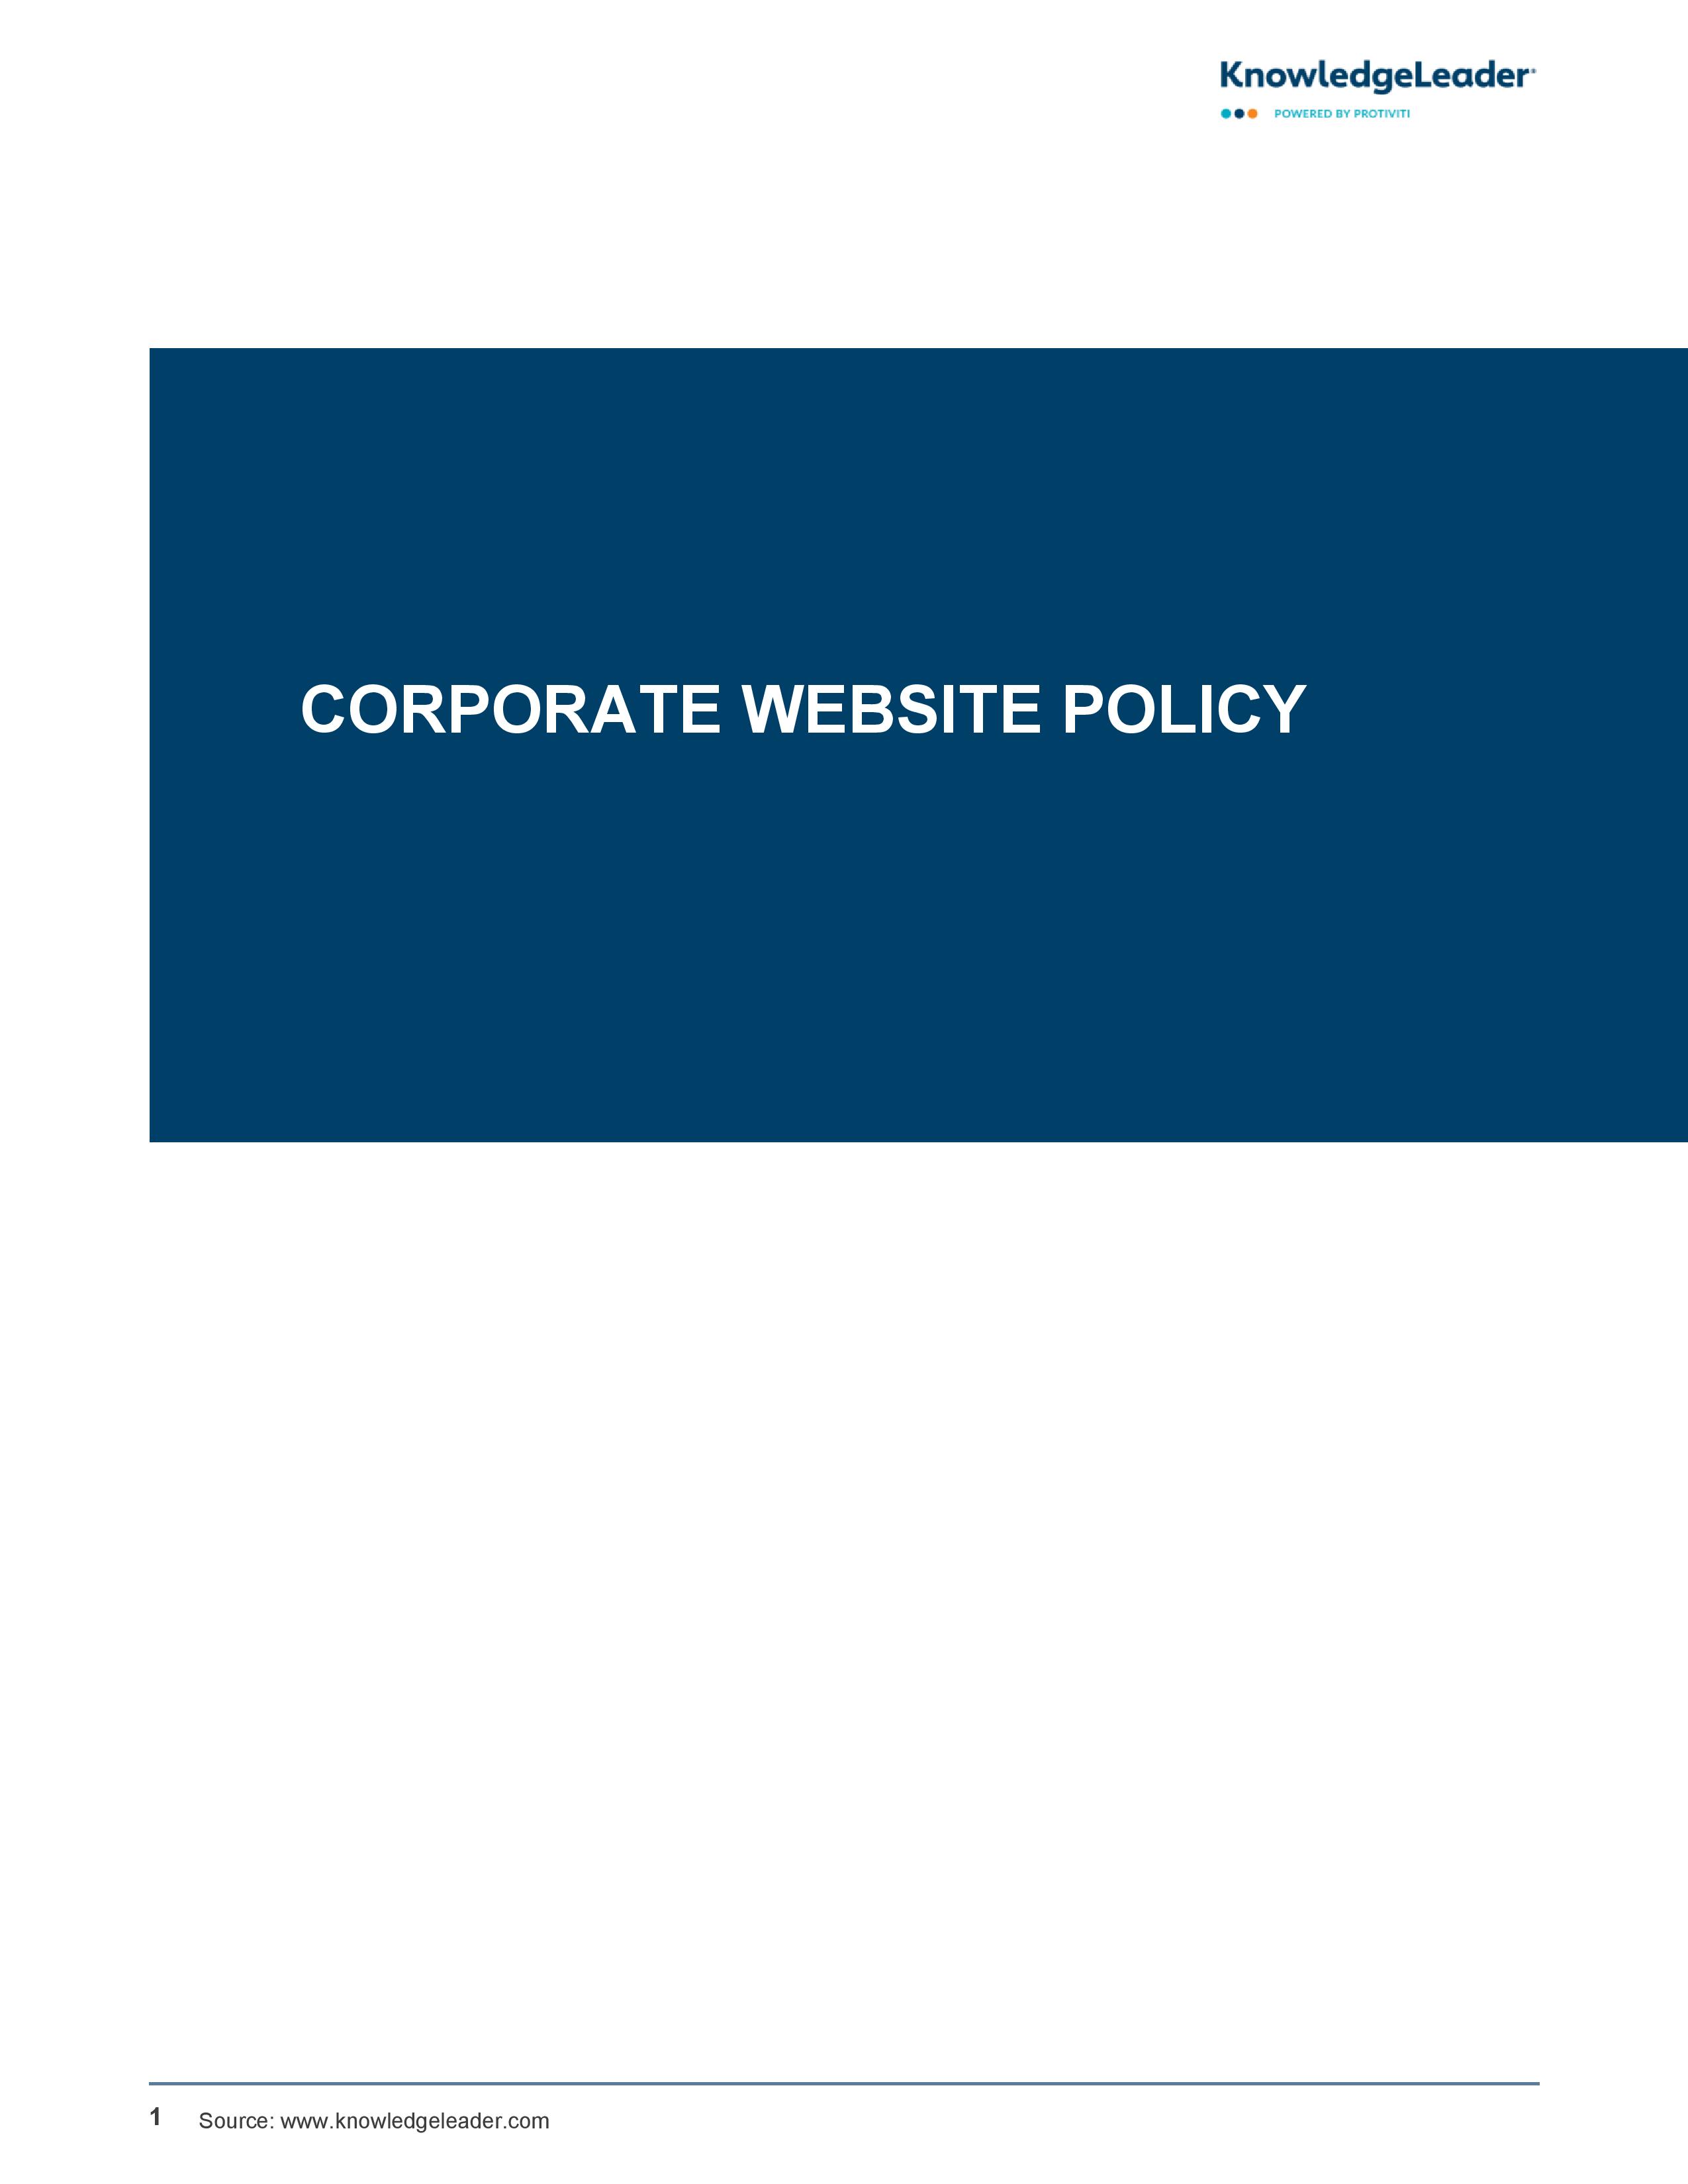 Screenshot of the first page of Corporate Website Policy